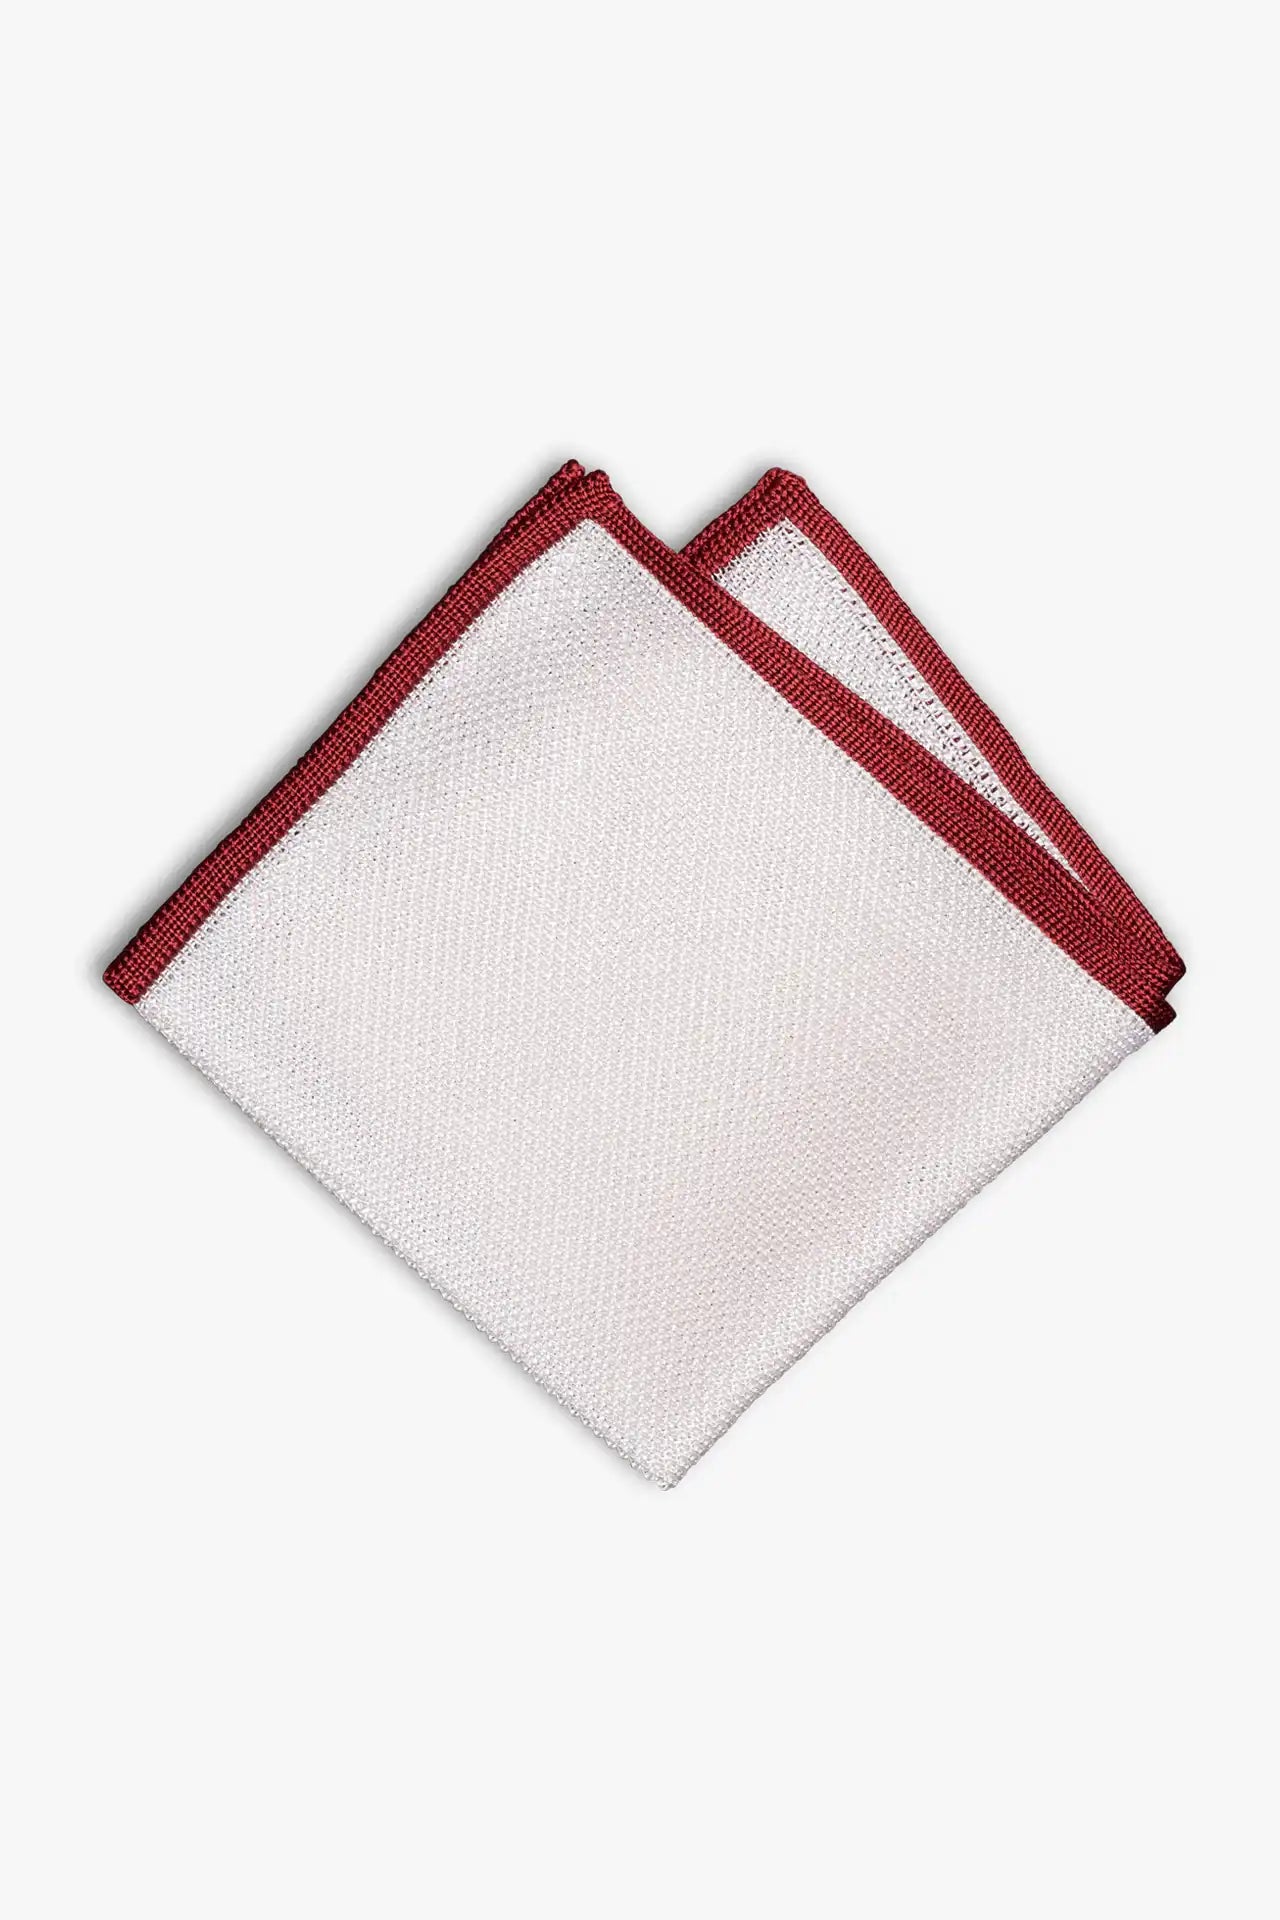 White knitted silk pocket square with red frame. Made in Italy.